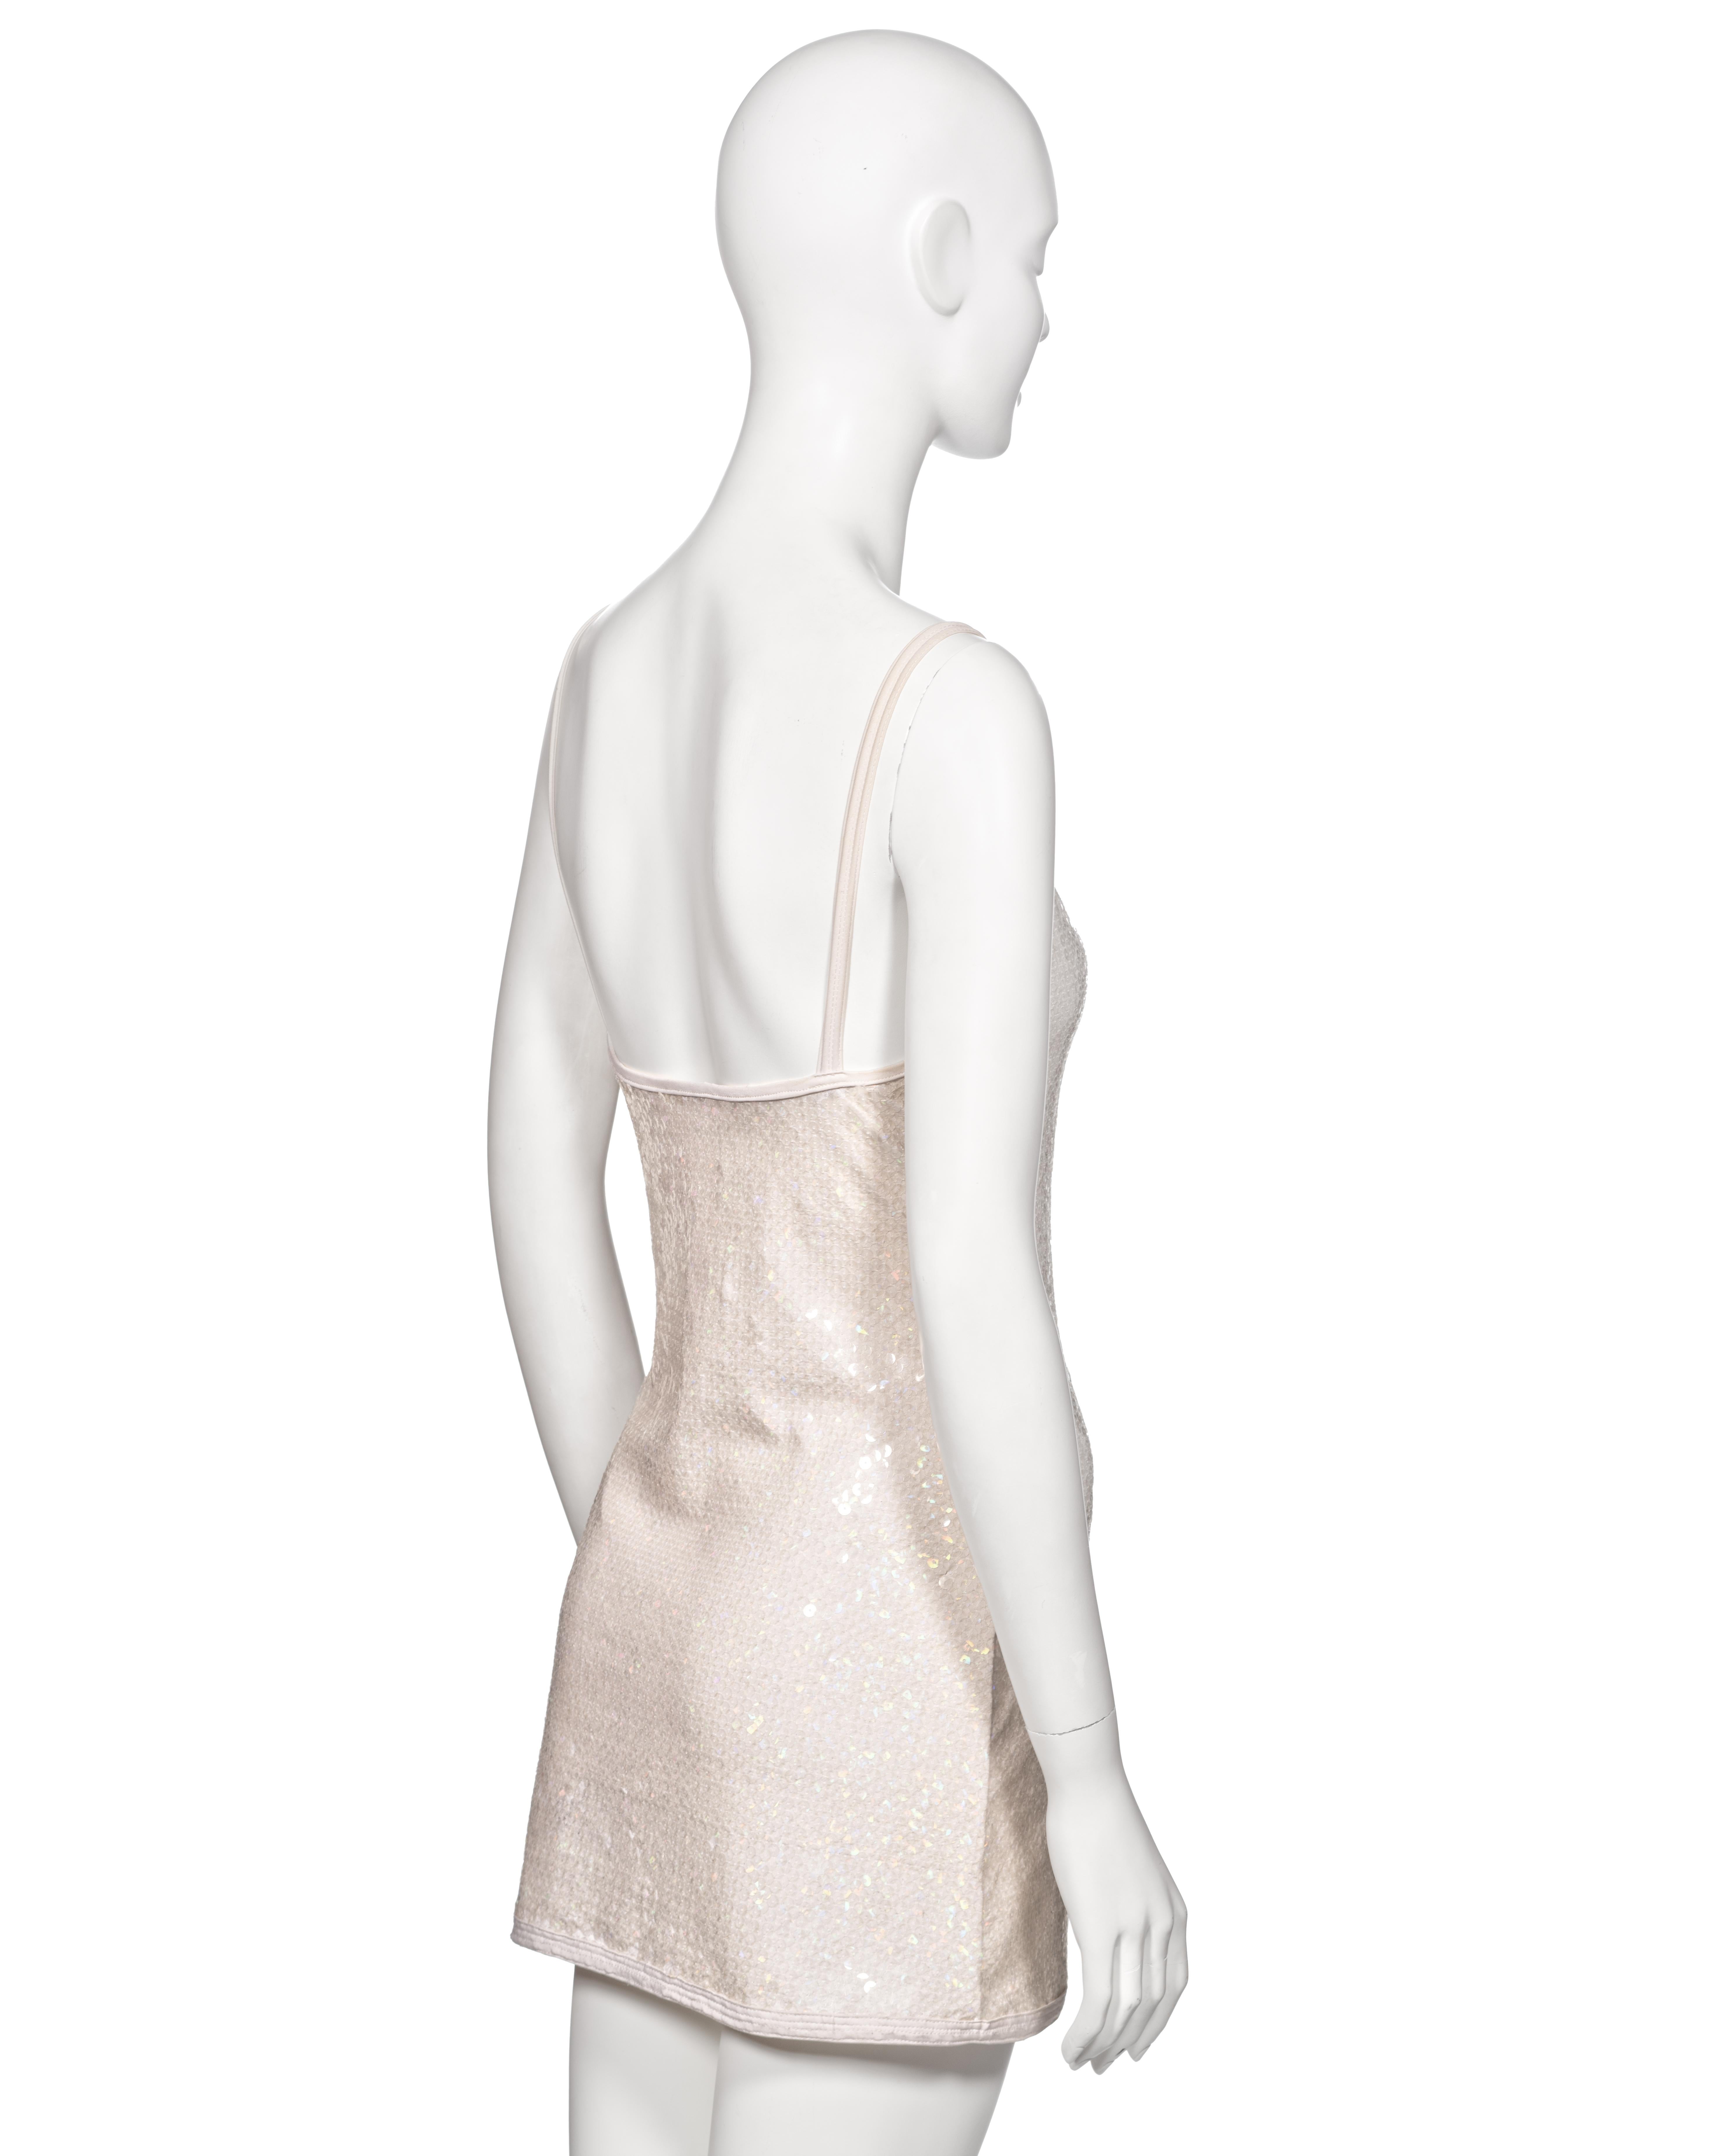 Chanel by Karl Lagerfeld White Iridescent Sequin Mini Dress, ss 2005 For Sale 3